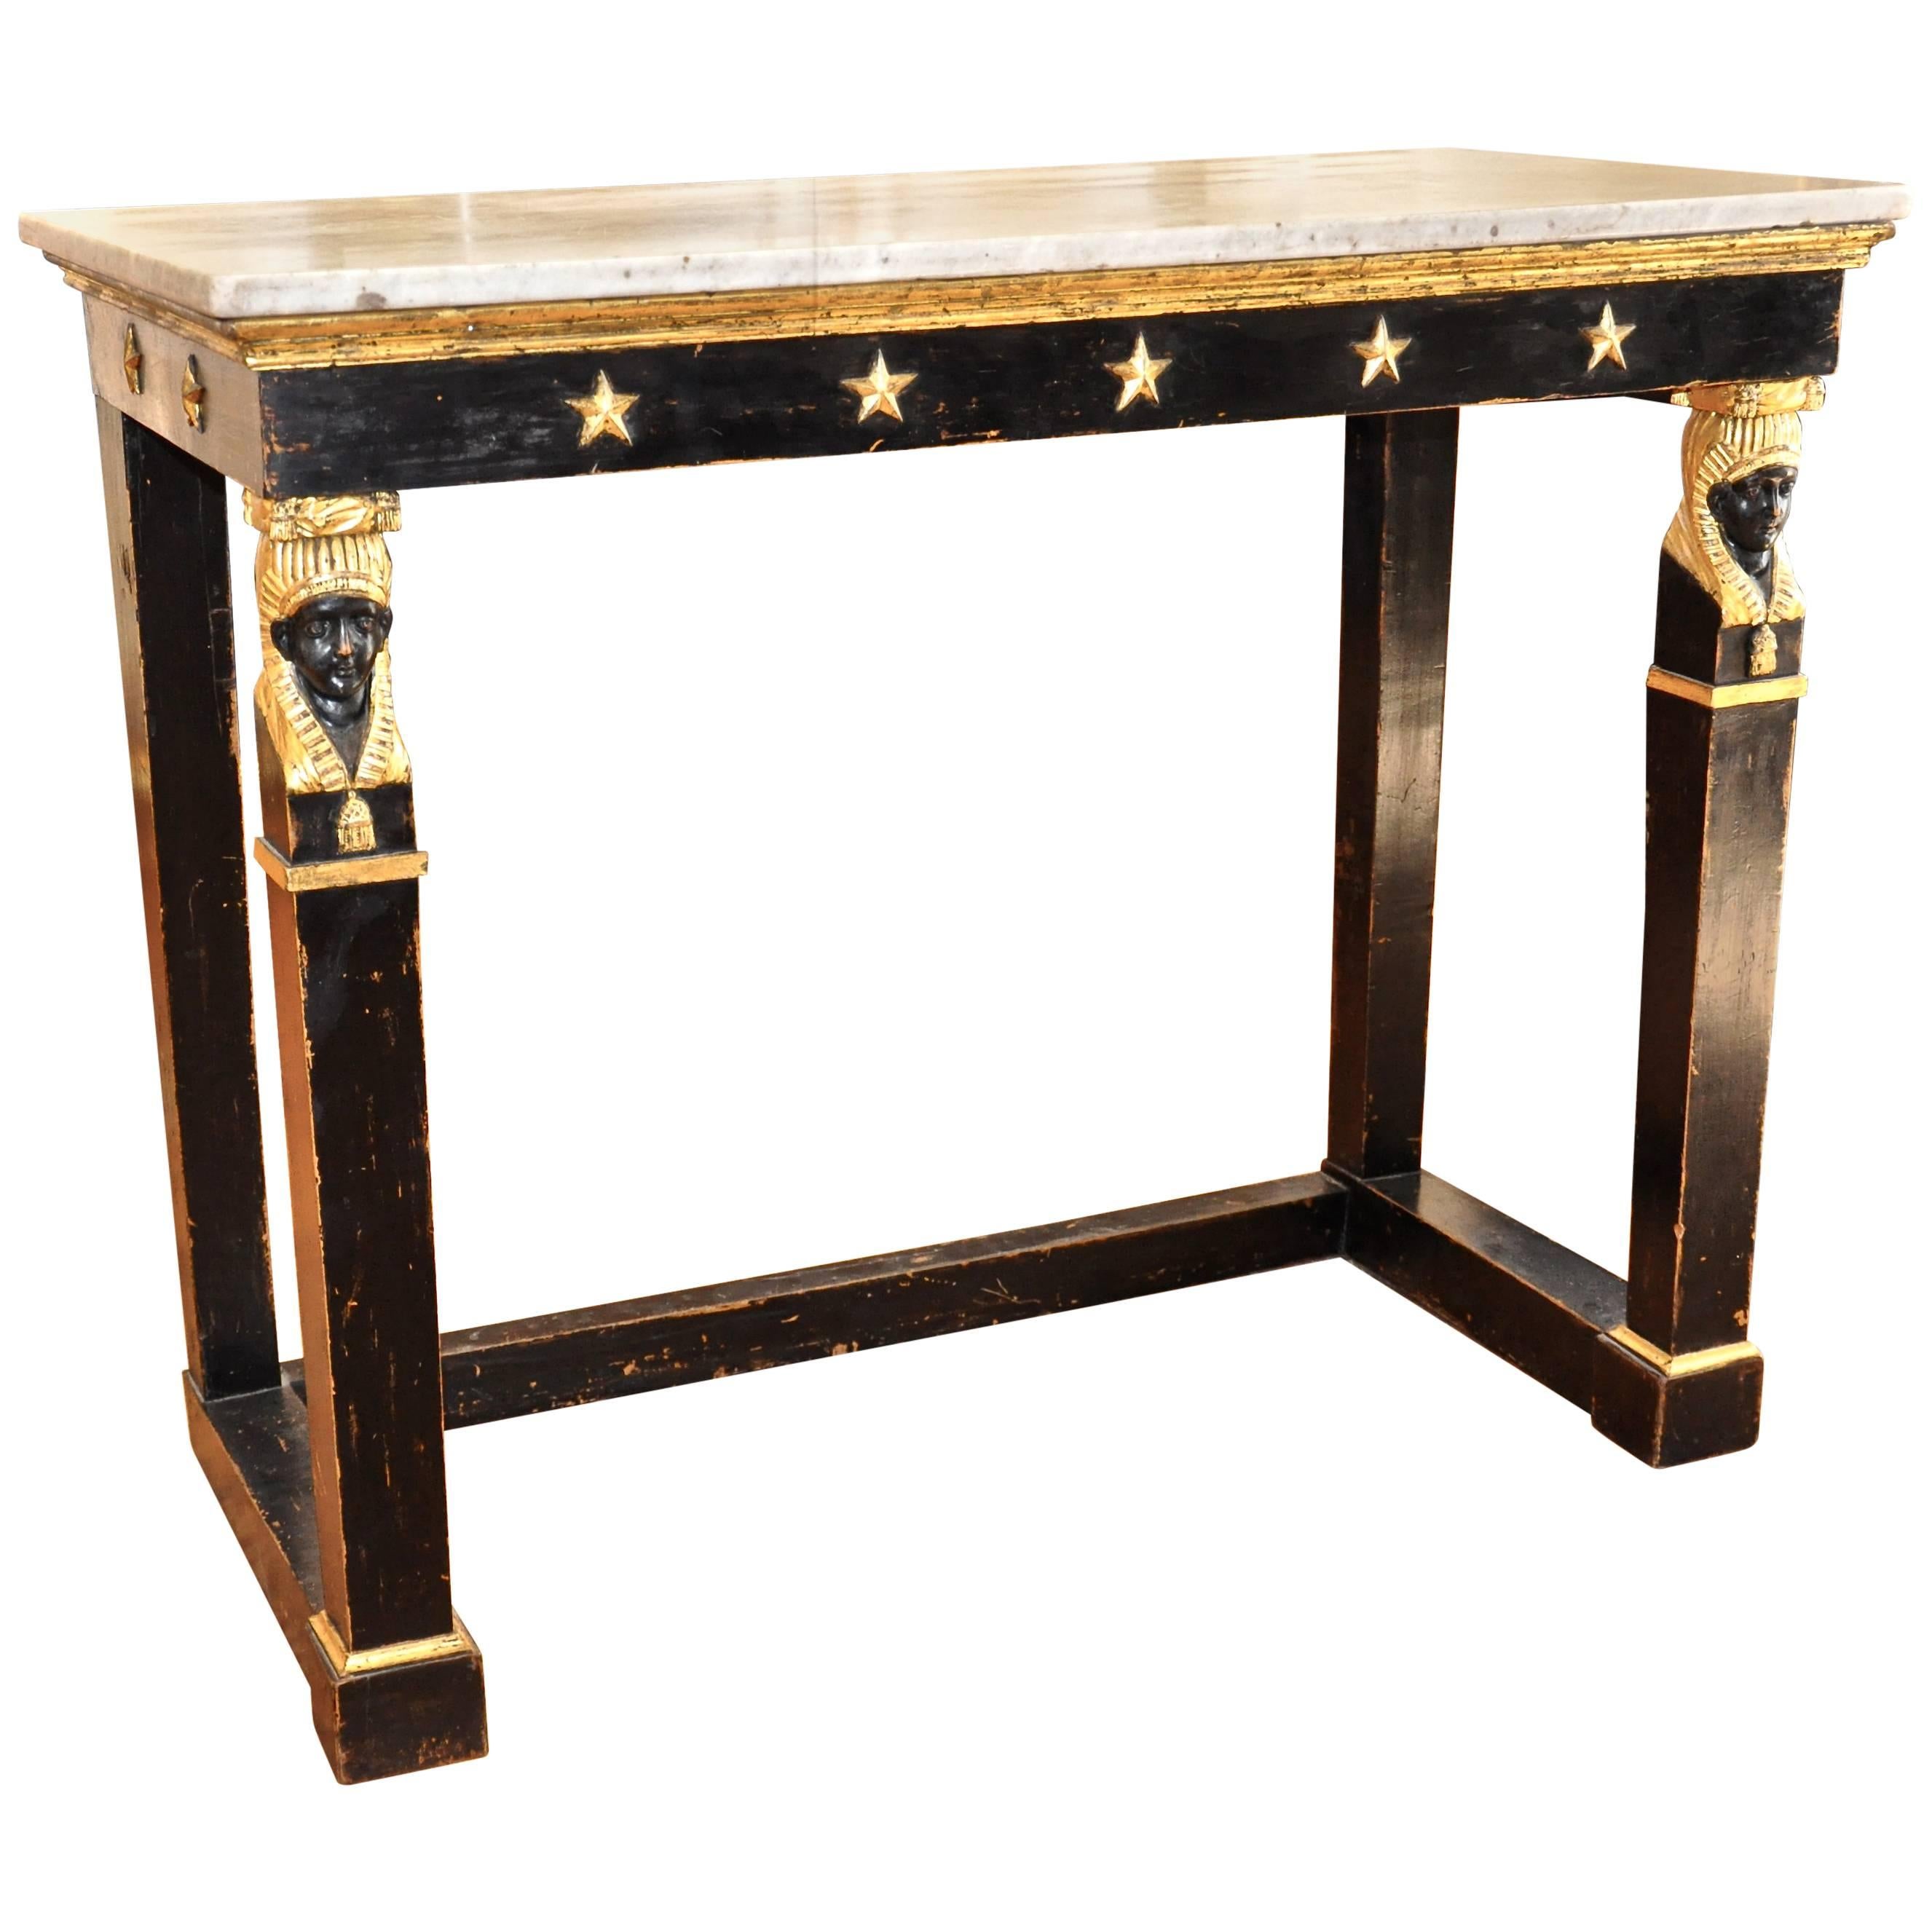 Chic Period Italian Carved and Gilt Neoclassical or Empire Console Table For Sale